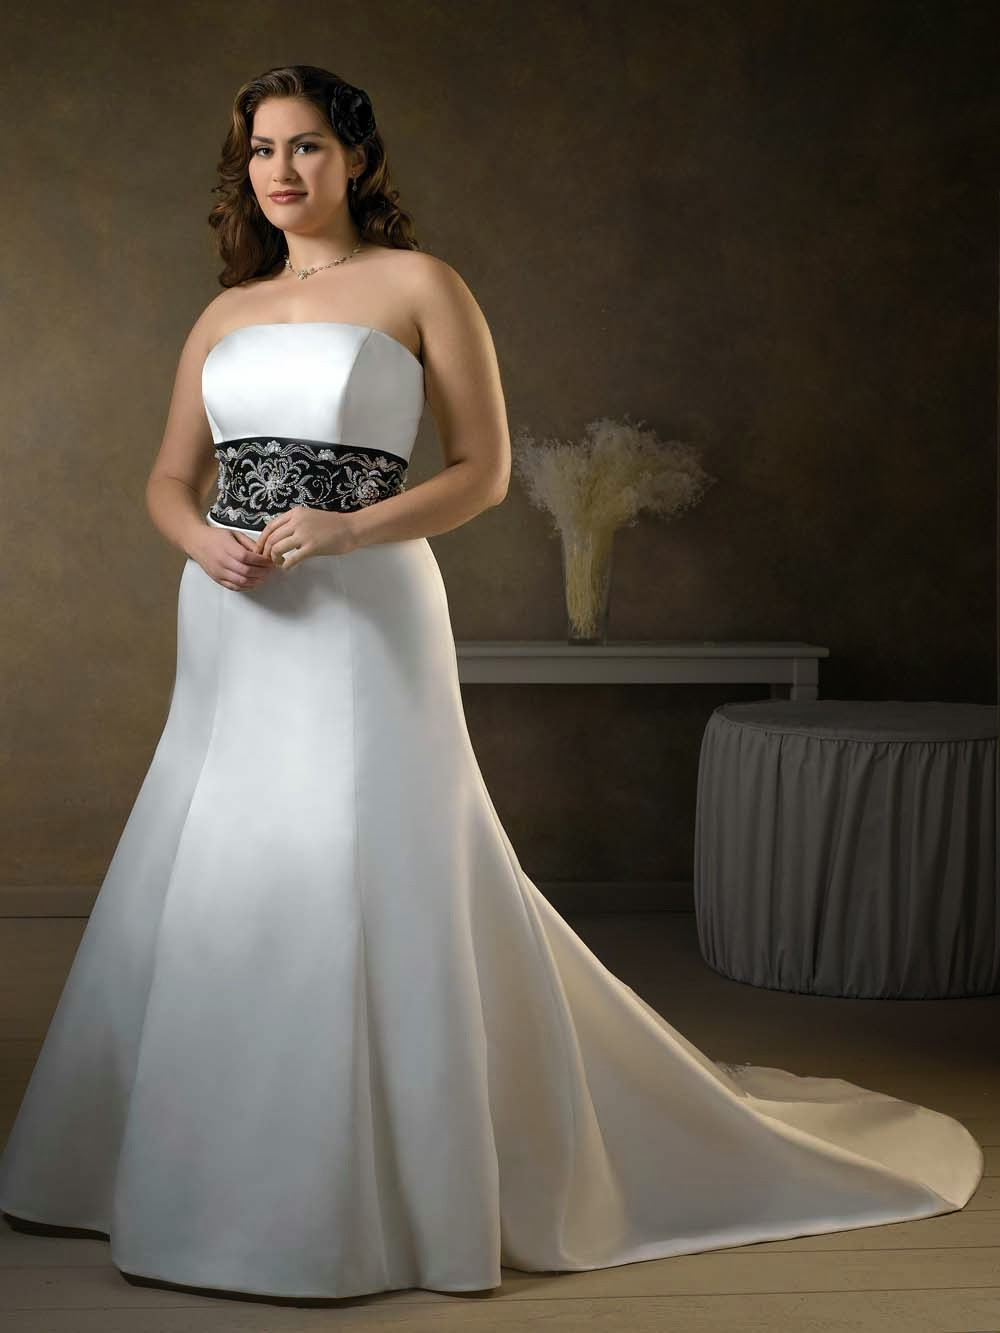 Affordable Wedding Gowns
 USED WEDDING GOWN GET HIGH QUALITY PLUS SIZE DRESS WITH